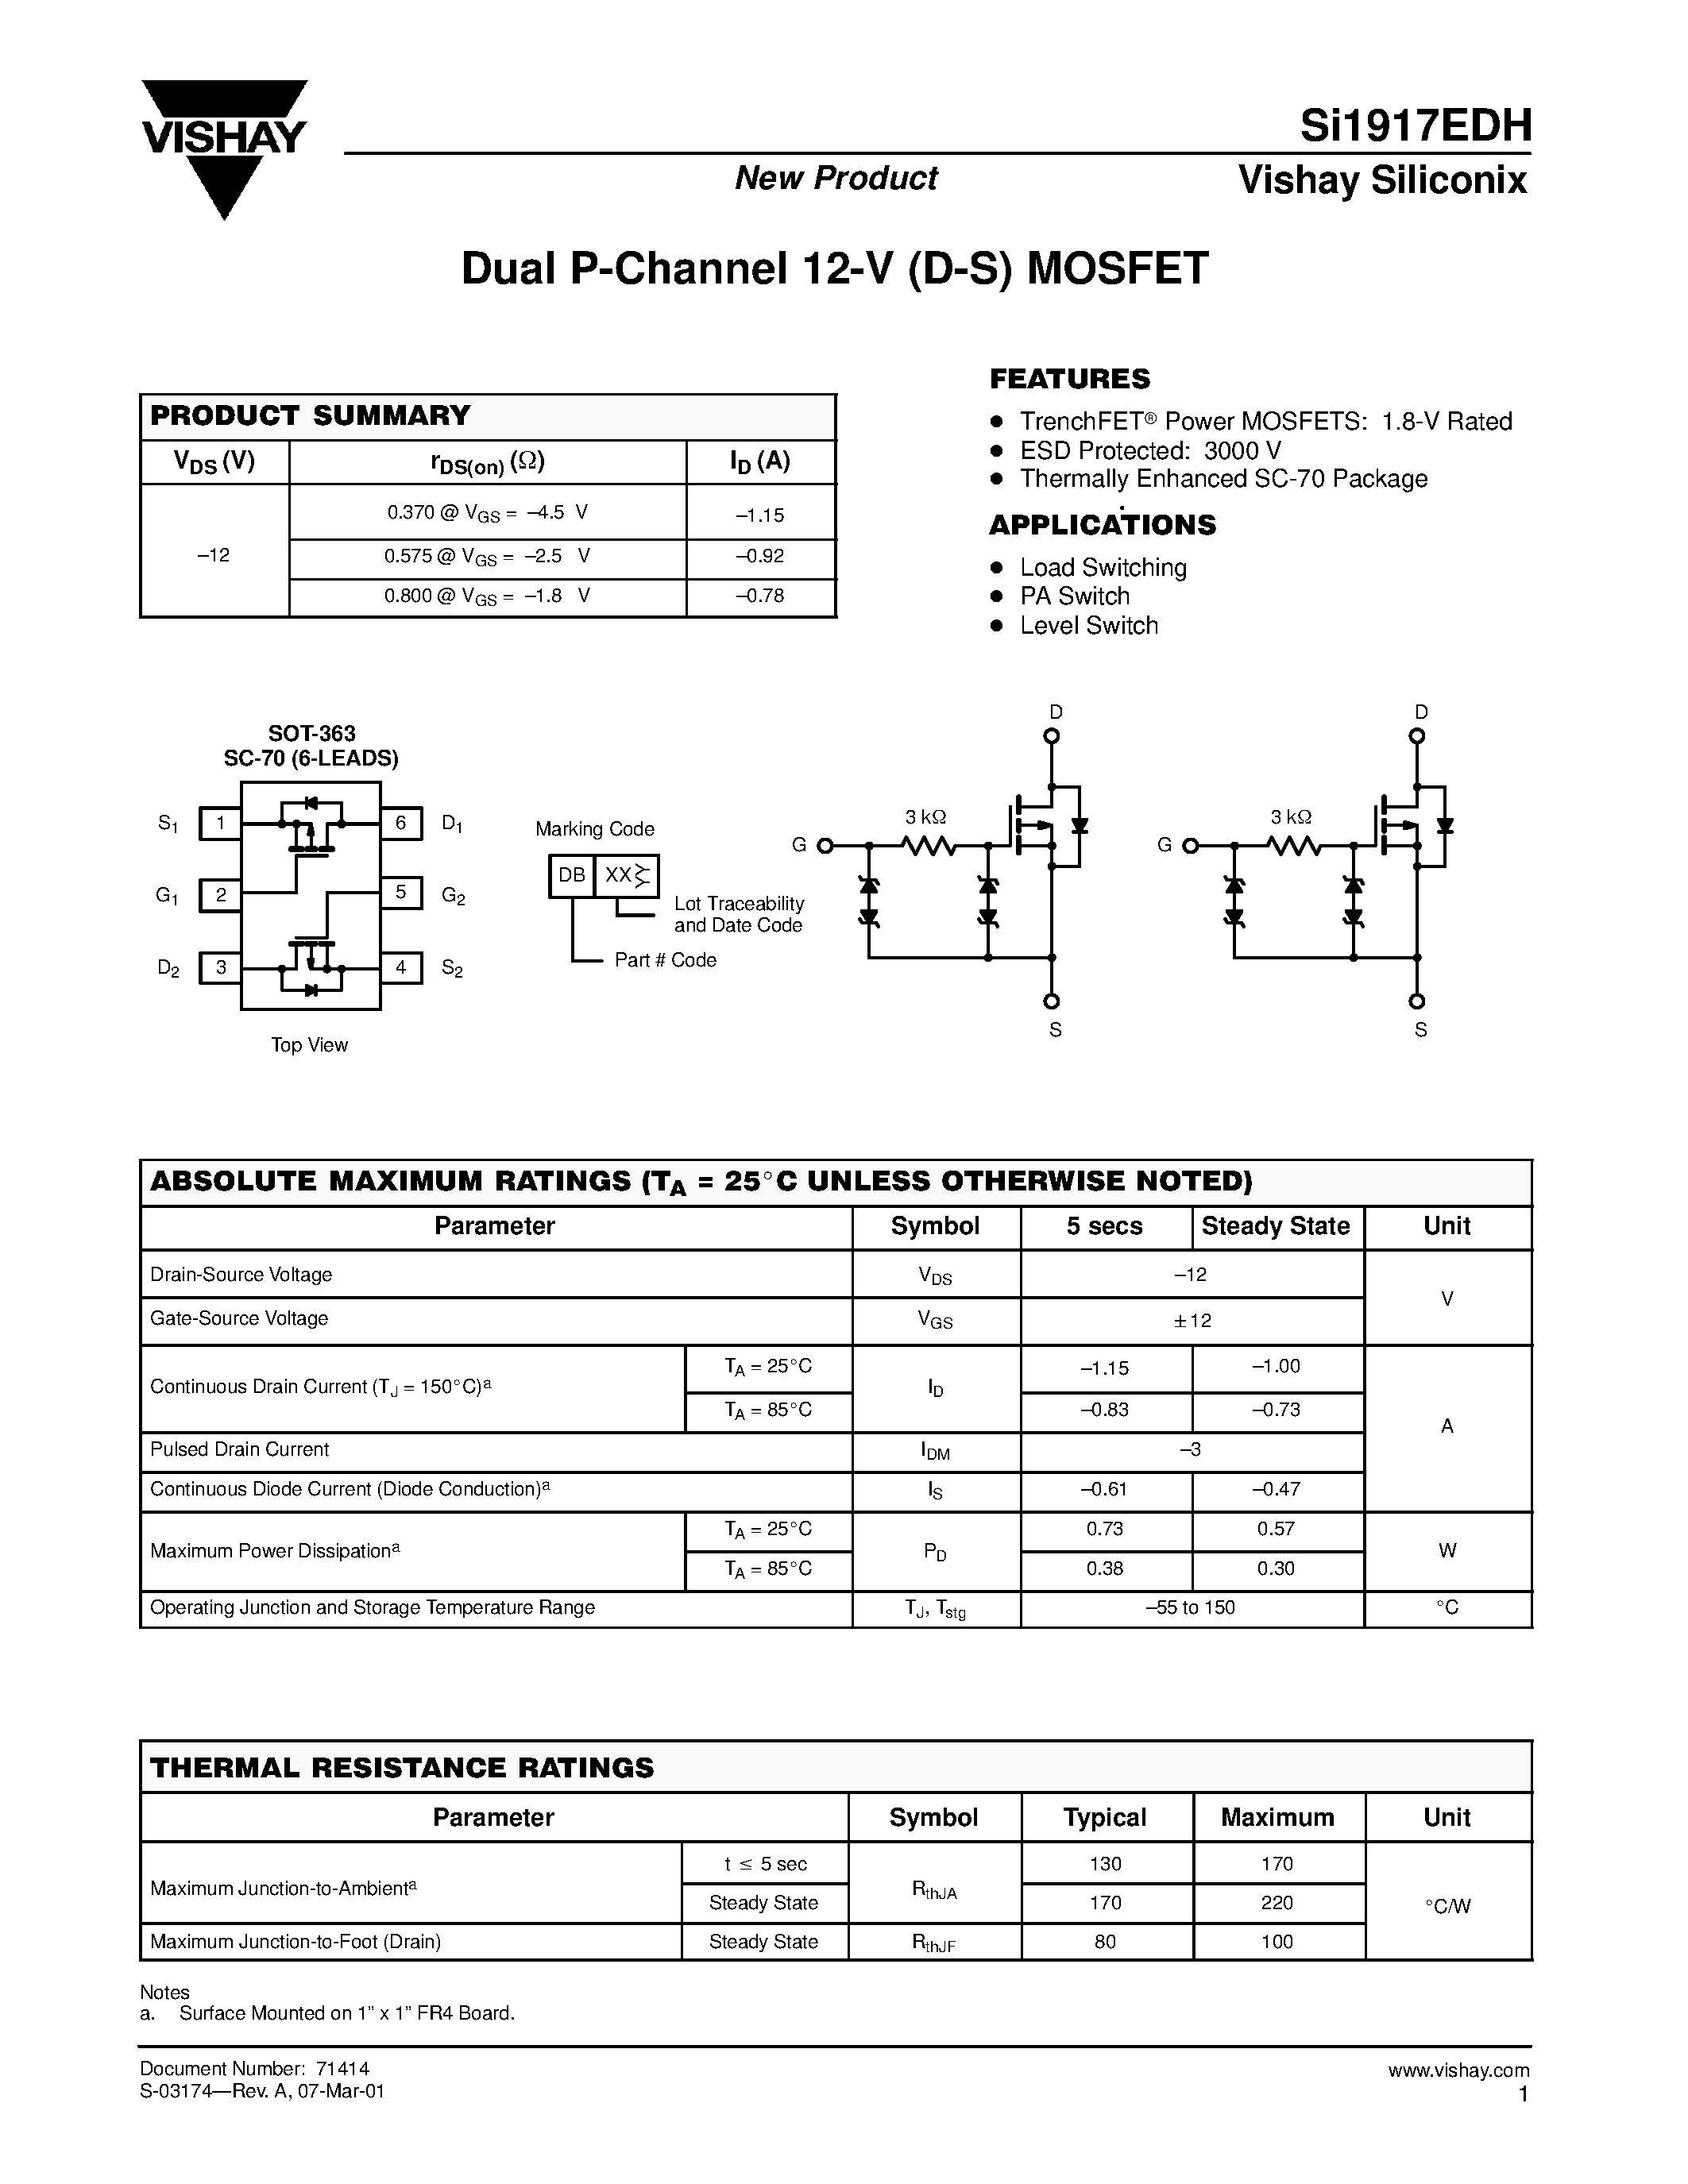 Datasheet SI1917EDH - Dual P-Channel 12-V (D-S) MOSFET page 1